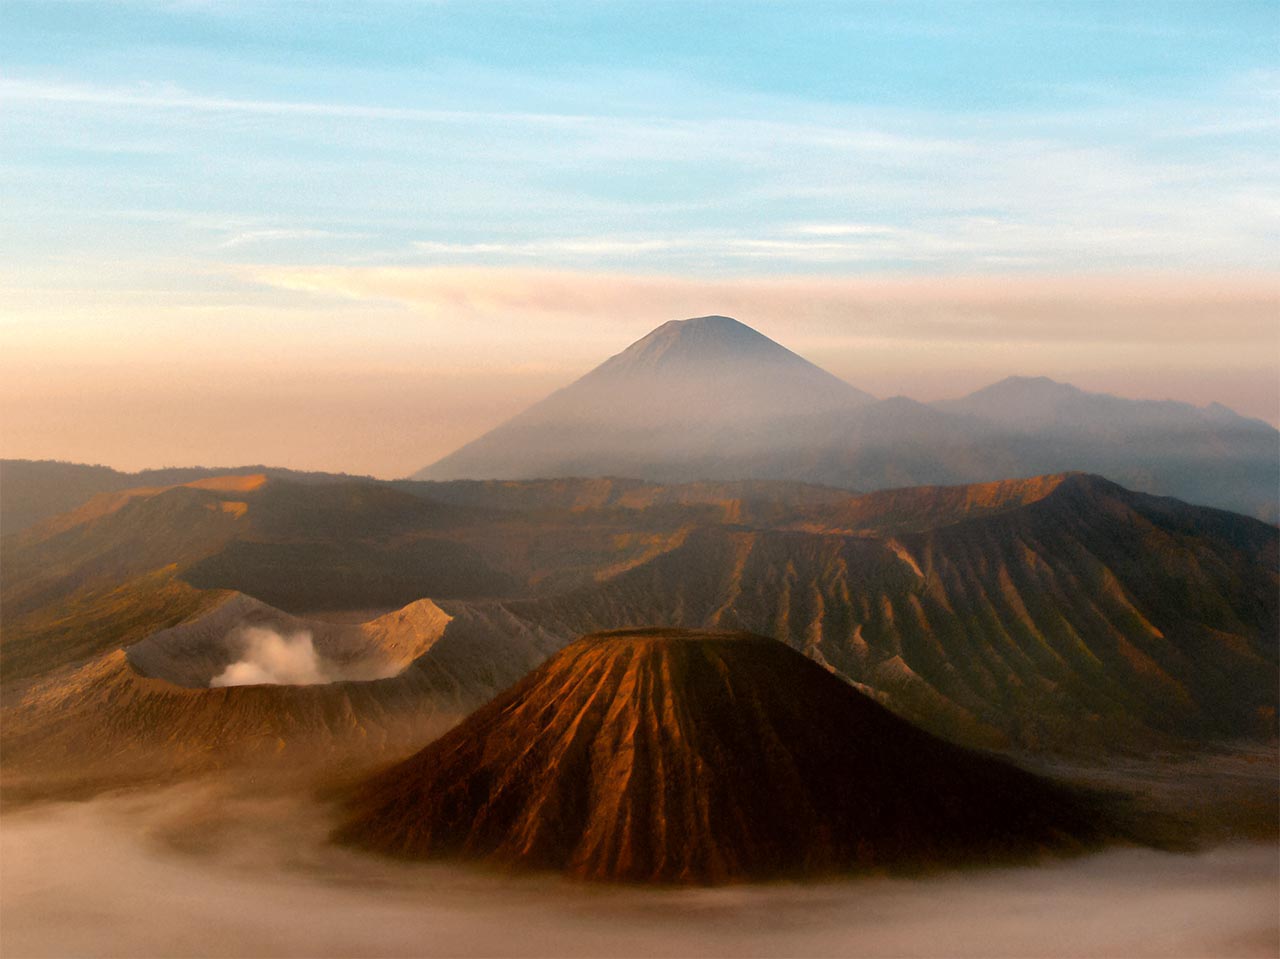 Steam rises from Mount Bromo's crater (in the foreground). It is one the most active volcanoes in the world. Mount Semeru stands tall at the background.